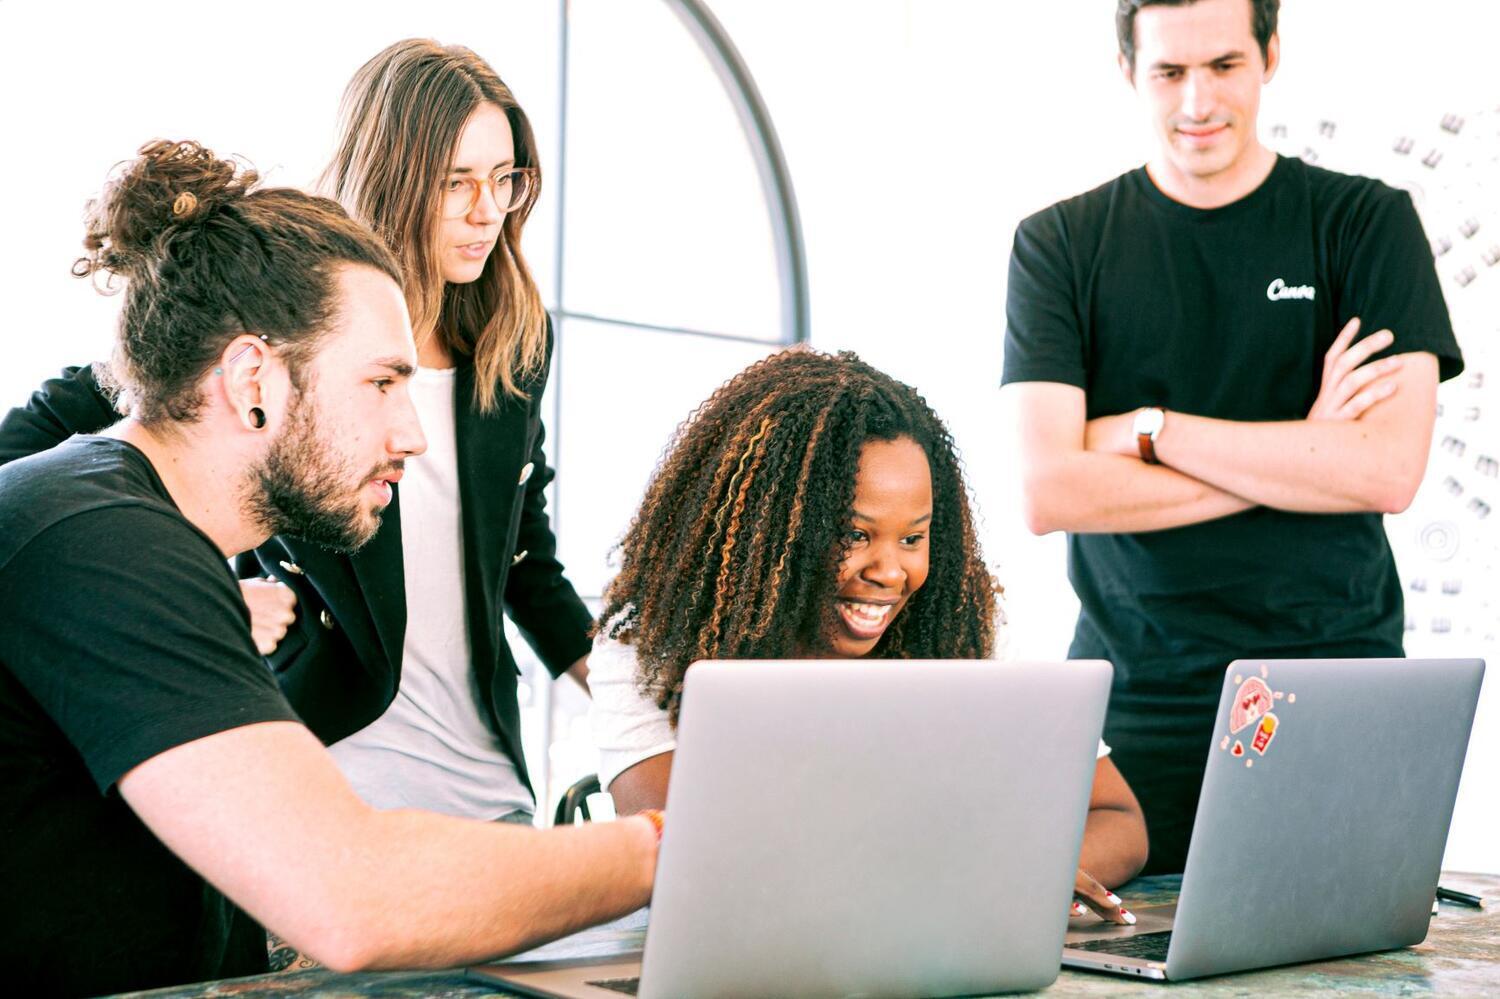  7 Research-Backed Ways To Effectively Manage Millennials in the Workplace